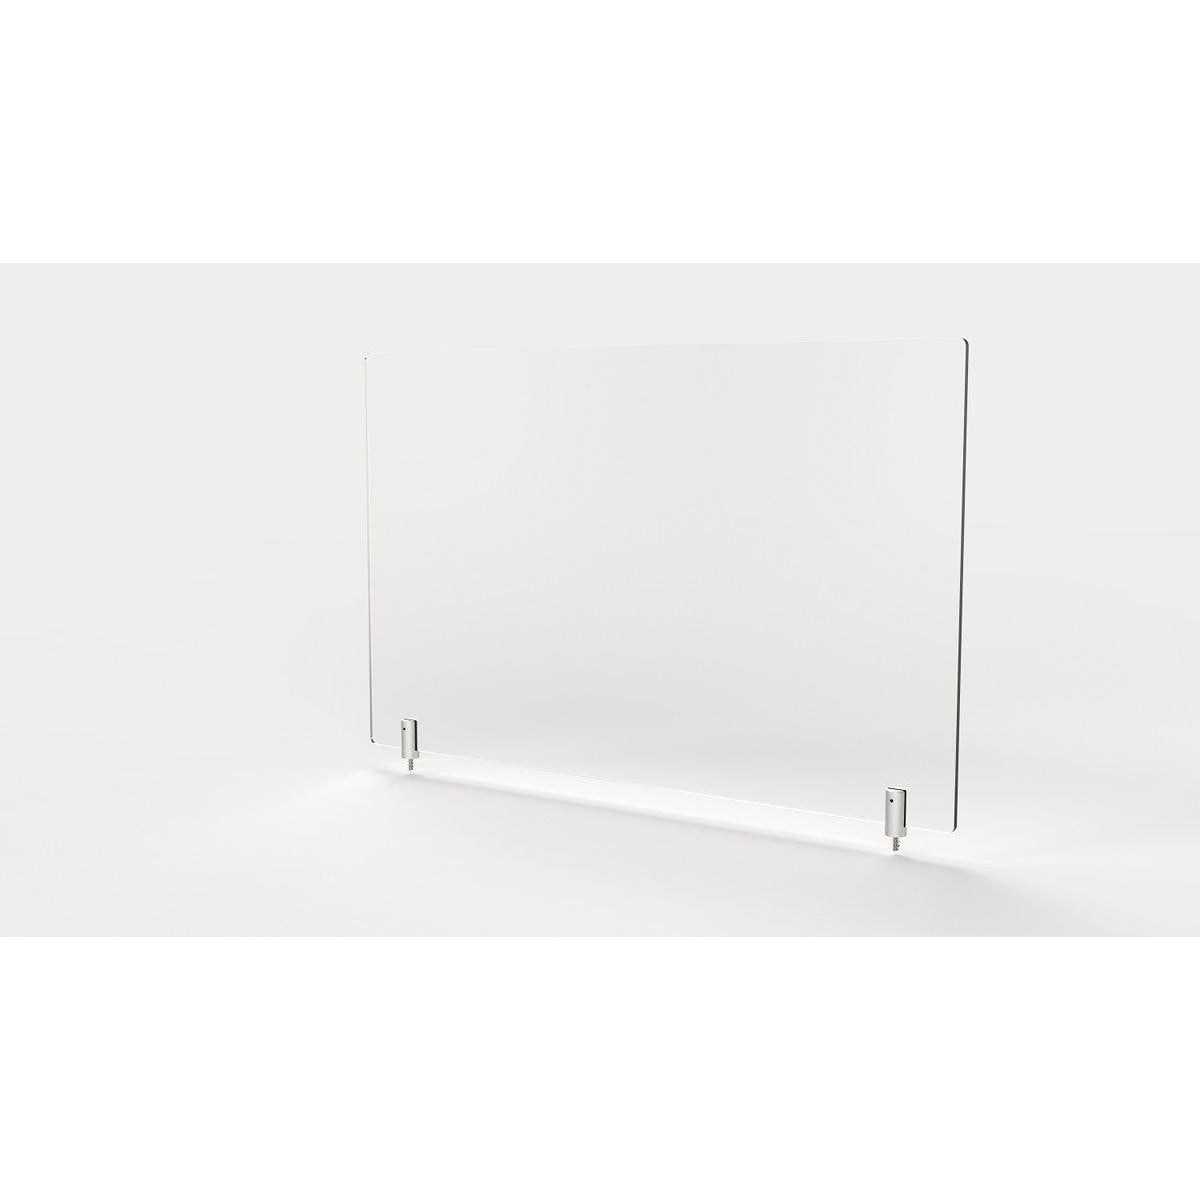 Frosted Thermoplastic Partition & Cubicle Extender with Permanent Screw Attachment, 18"H x 24"W